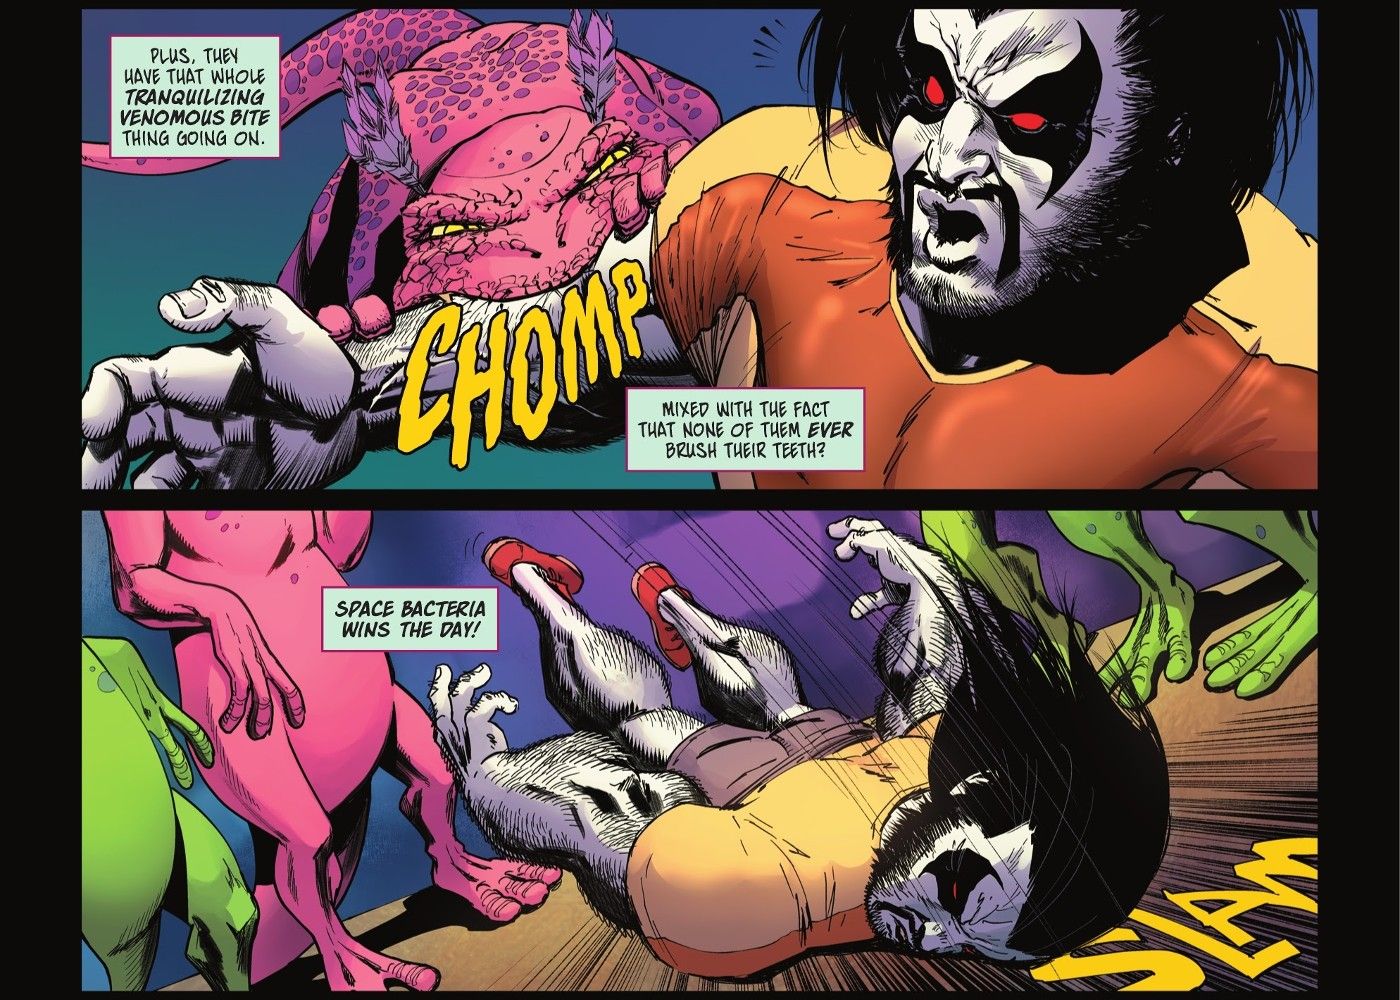 A space lizard infected with space bacteria defeats Lobo with its bite